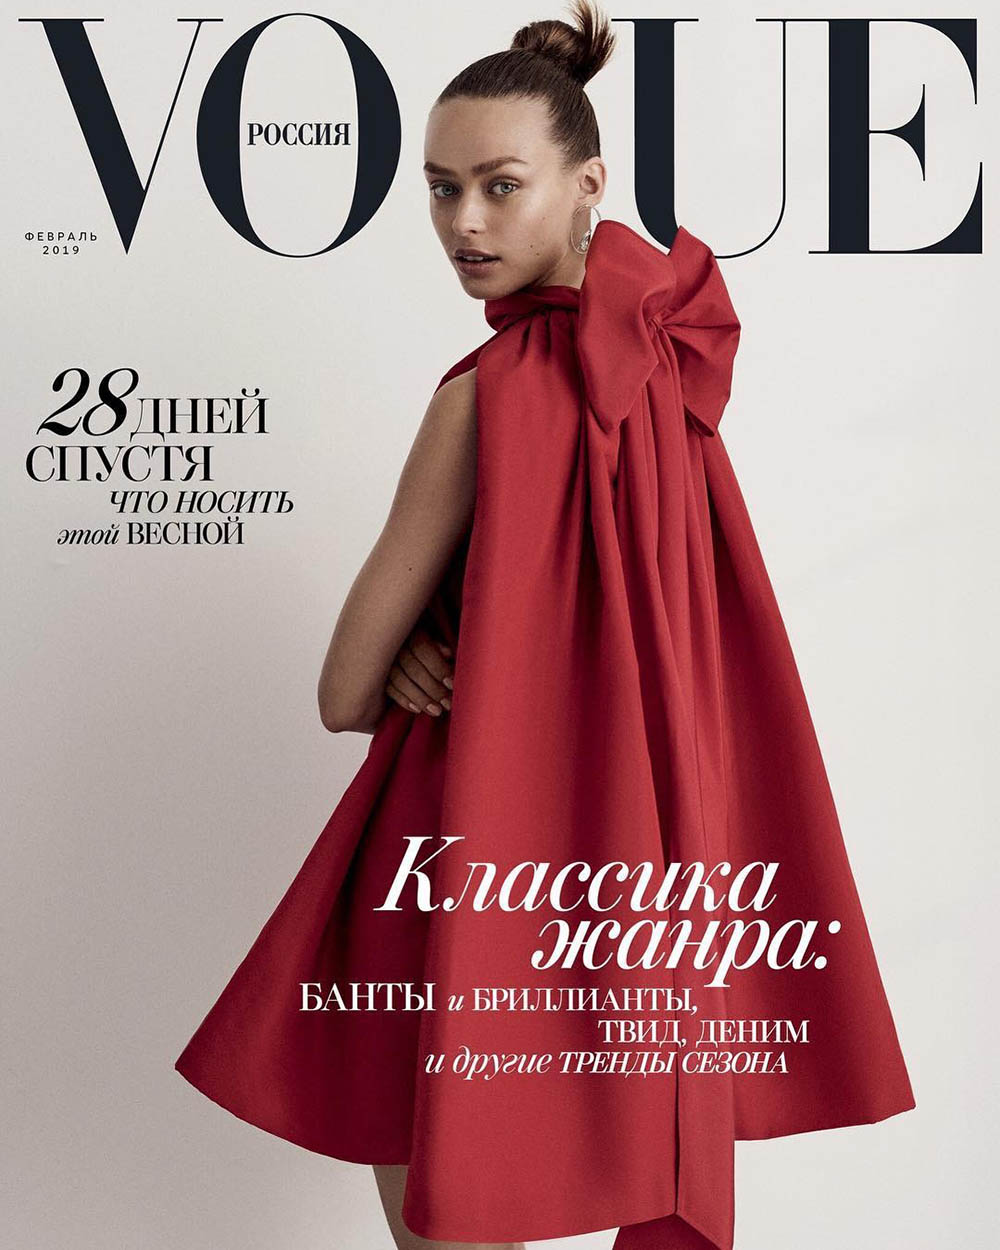 Birgit Kos covers Vogue Russia February 2019 by Giampaolo Sgura